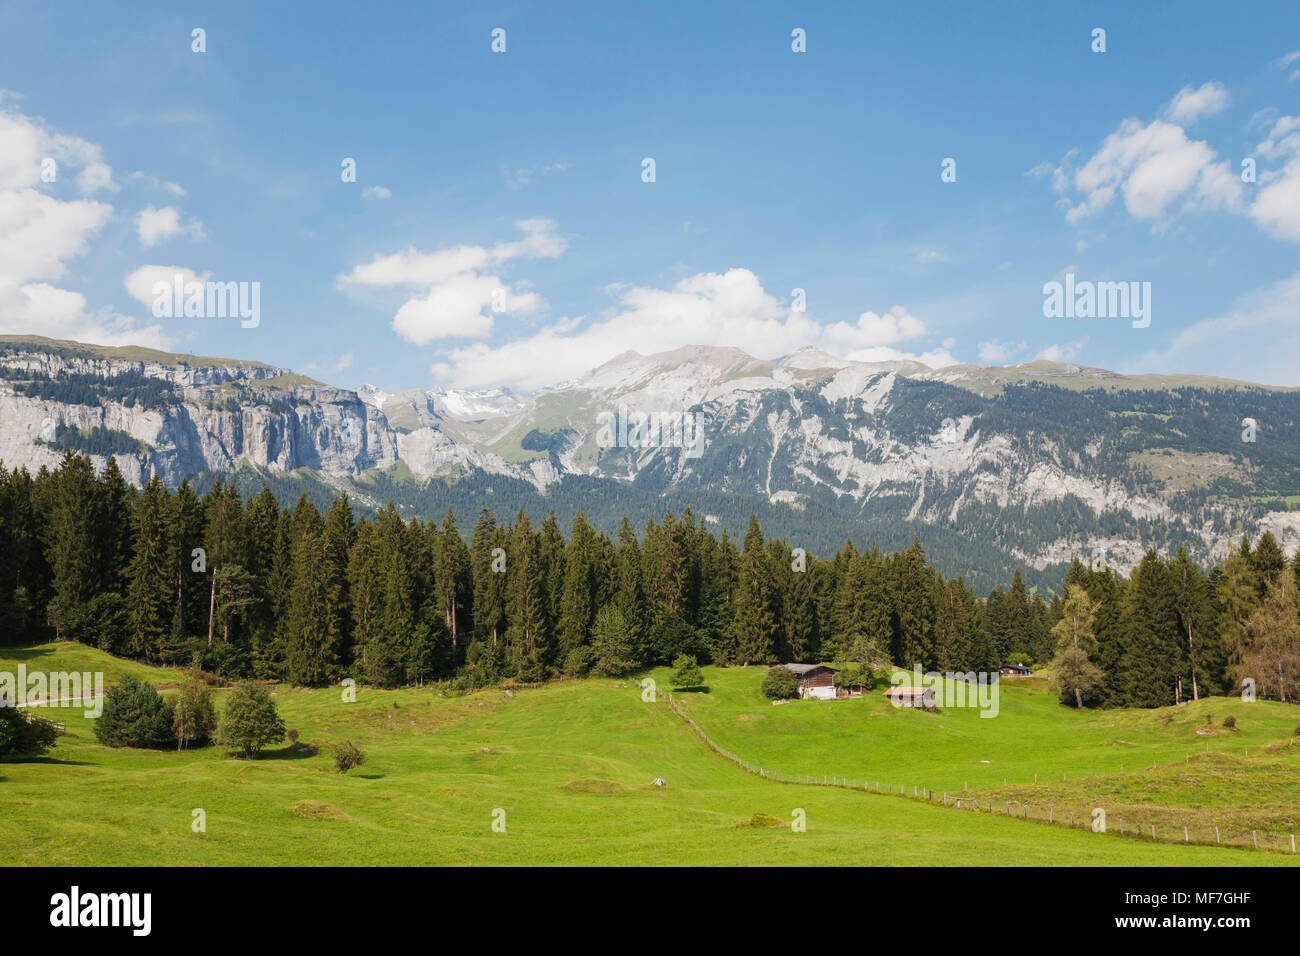 Switzerland, Grisons, Grison Alps, alpine meadows and view of Alps at Flims region Stock Photo